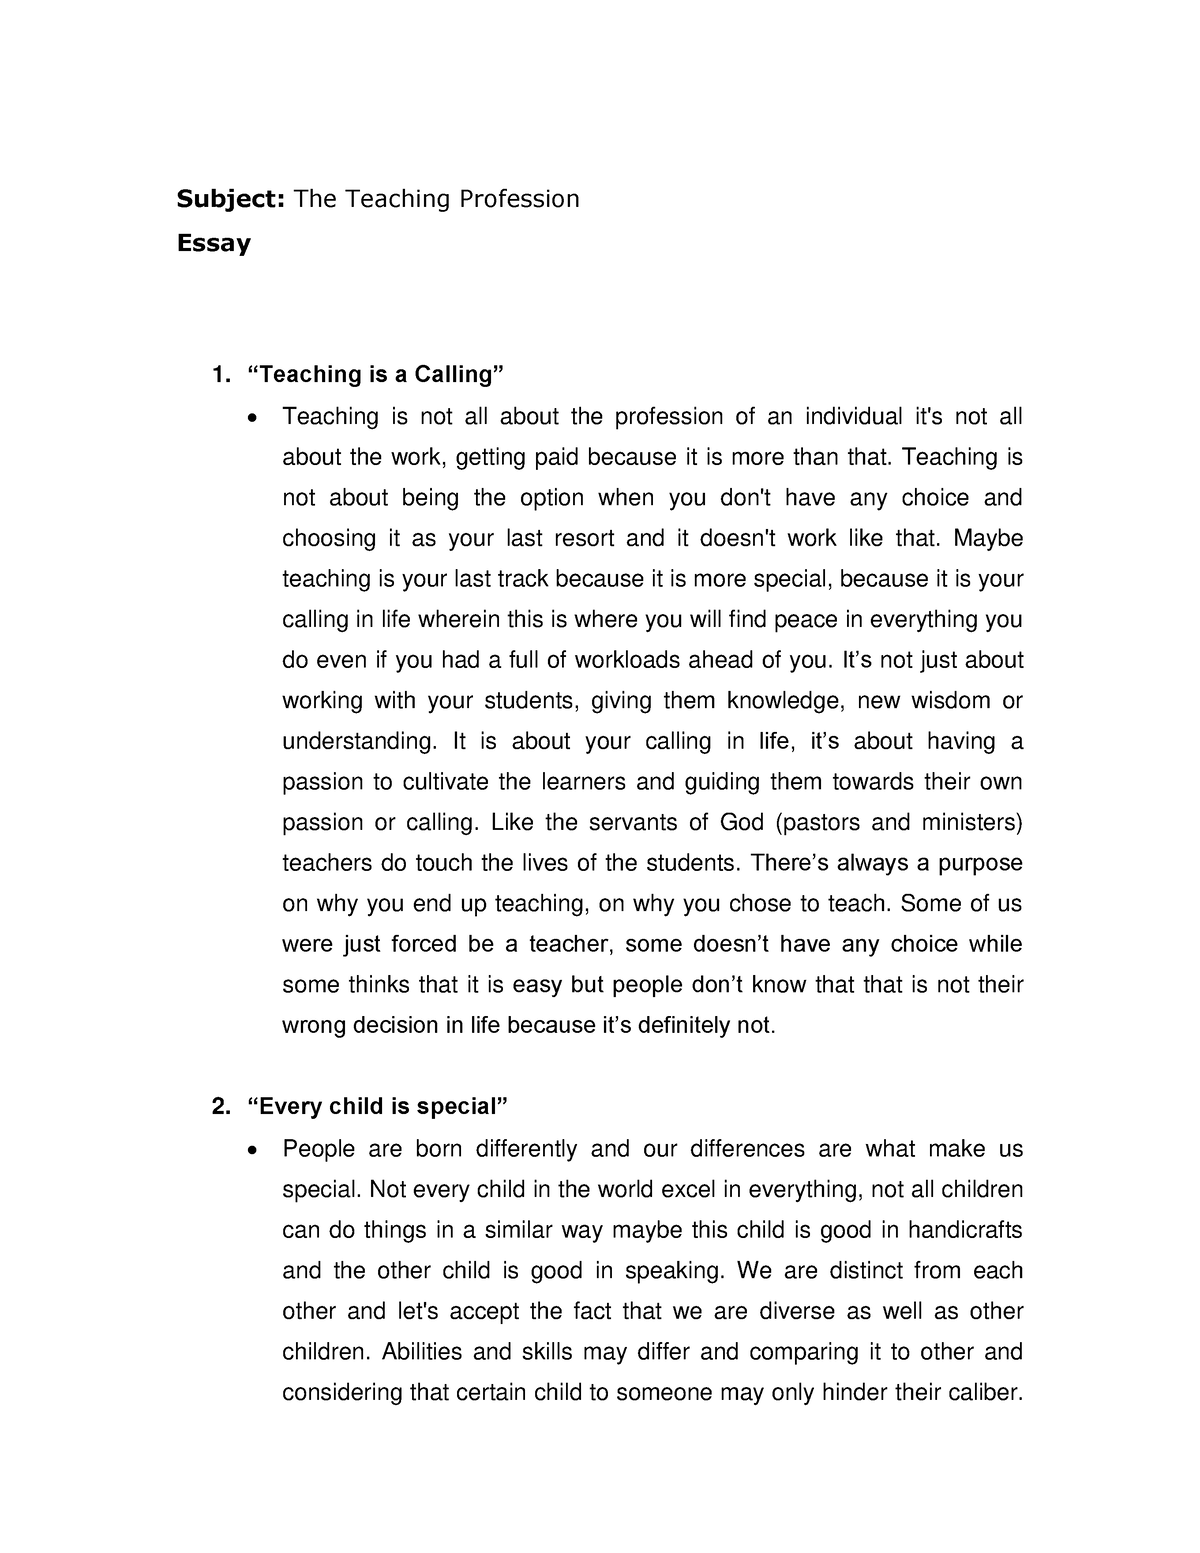 essay on the profession of teaching